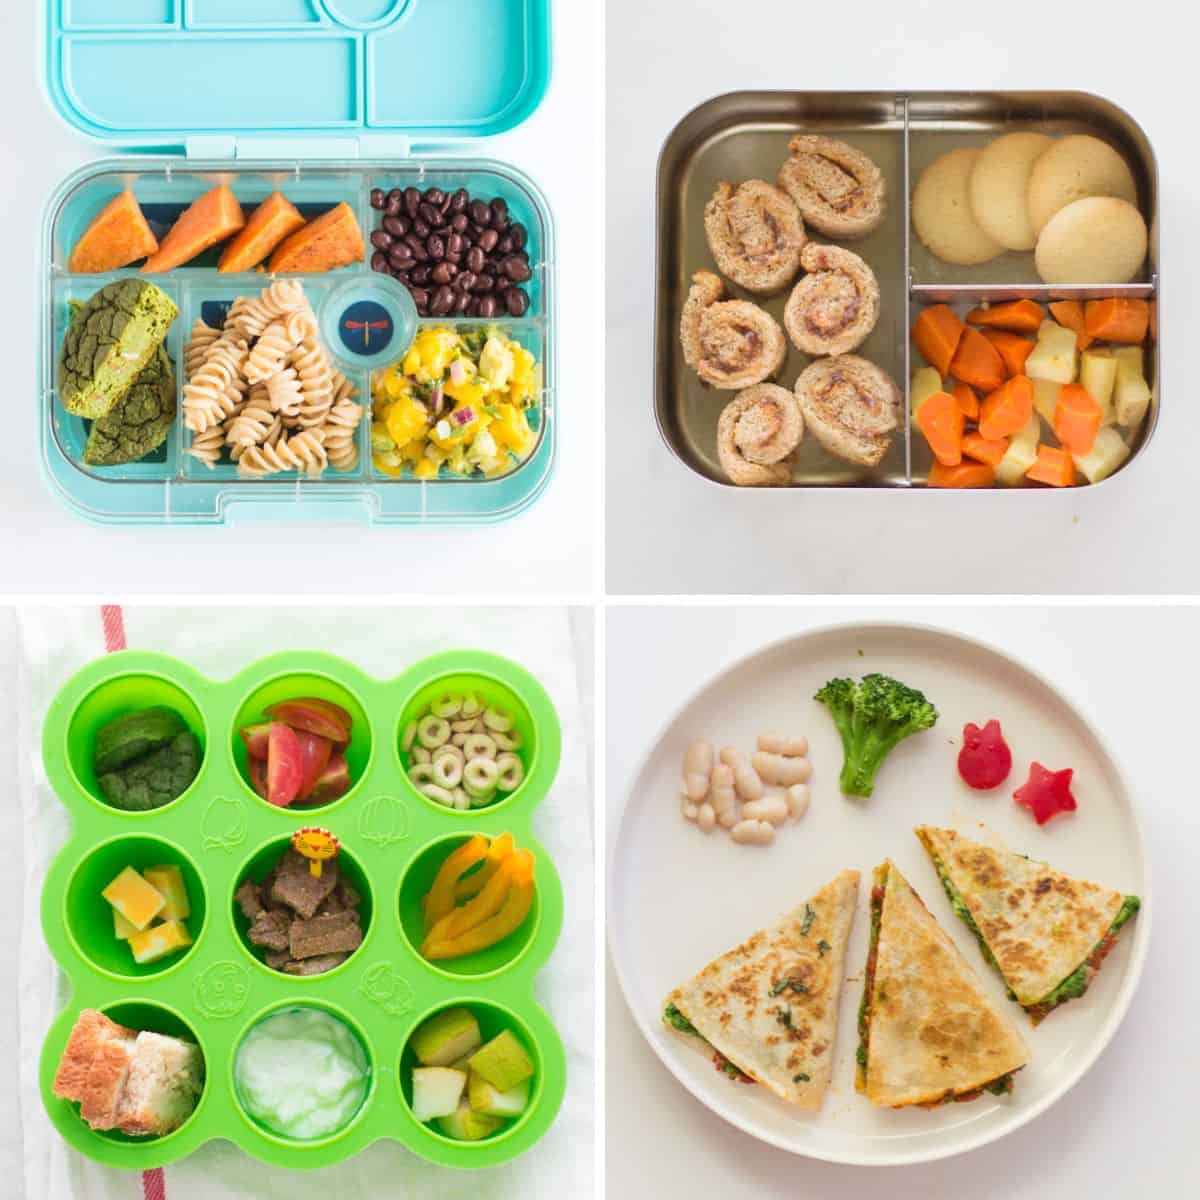 60 Healthy School Lunch Ideas for Kids - MJ and Hungryman